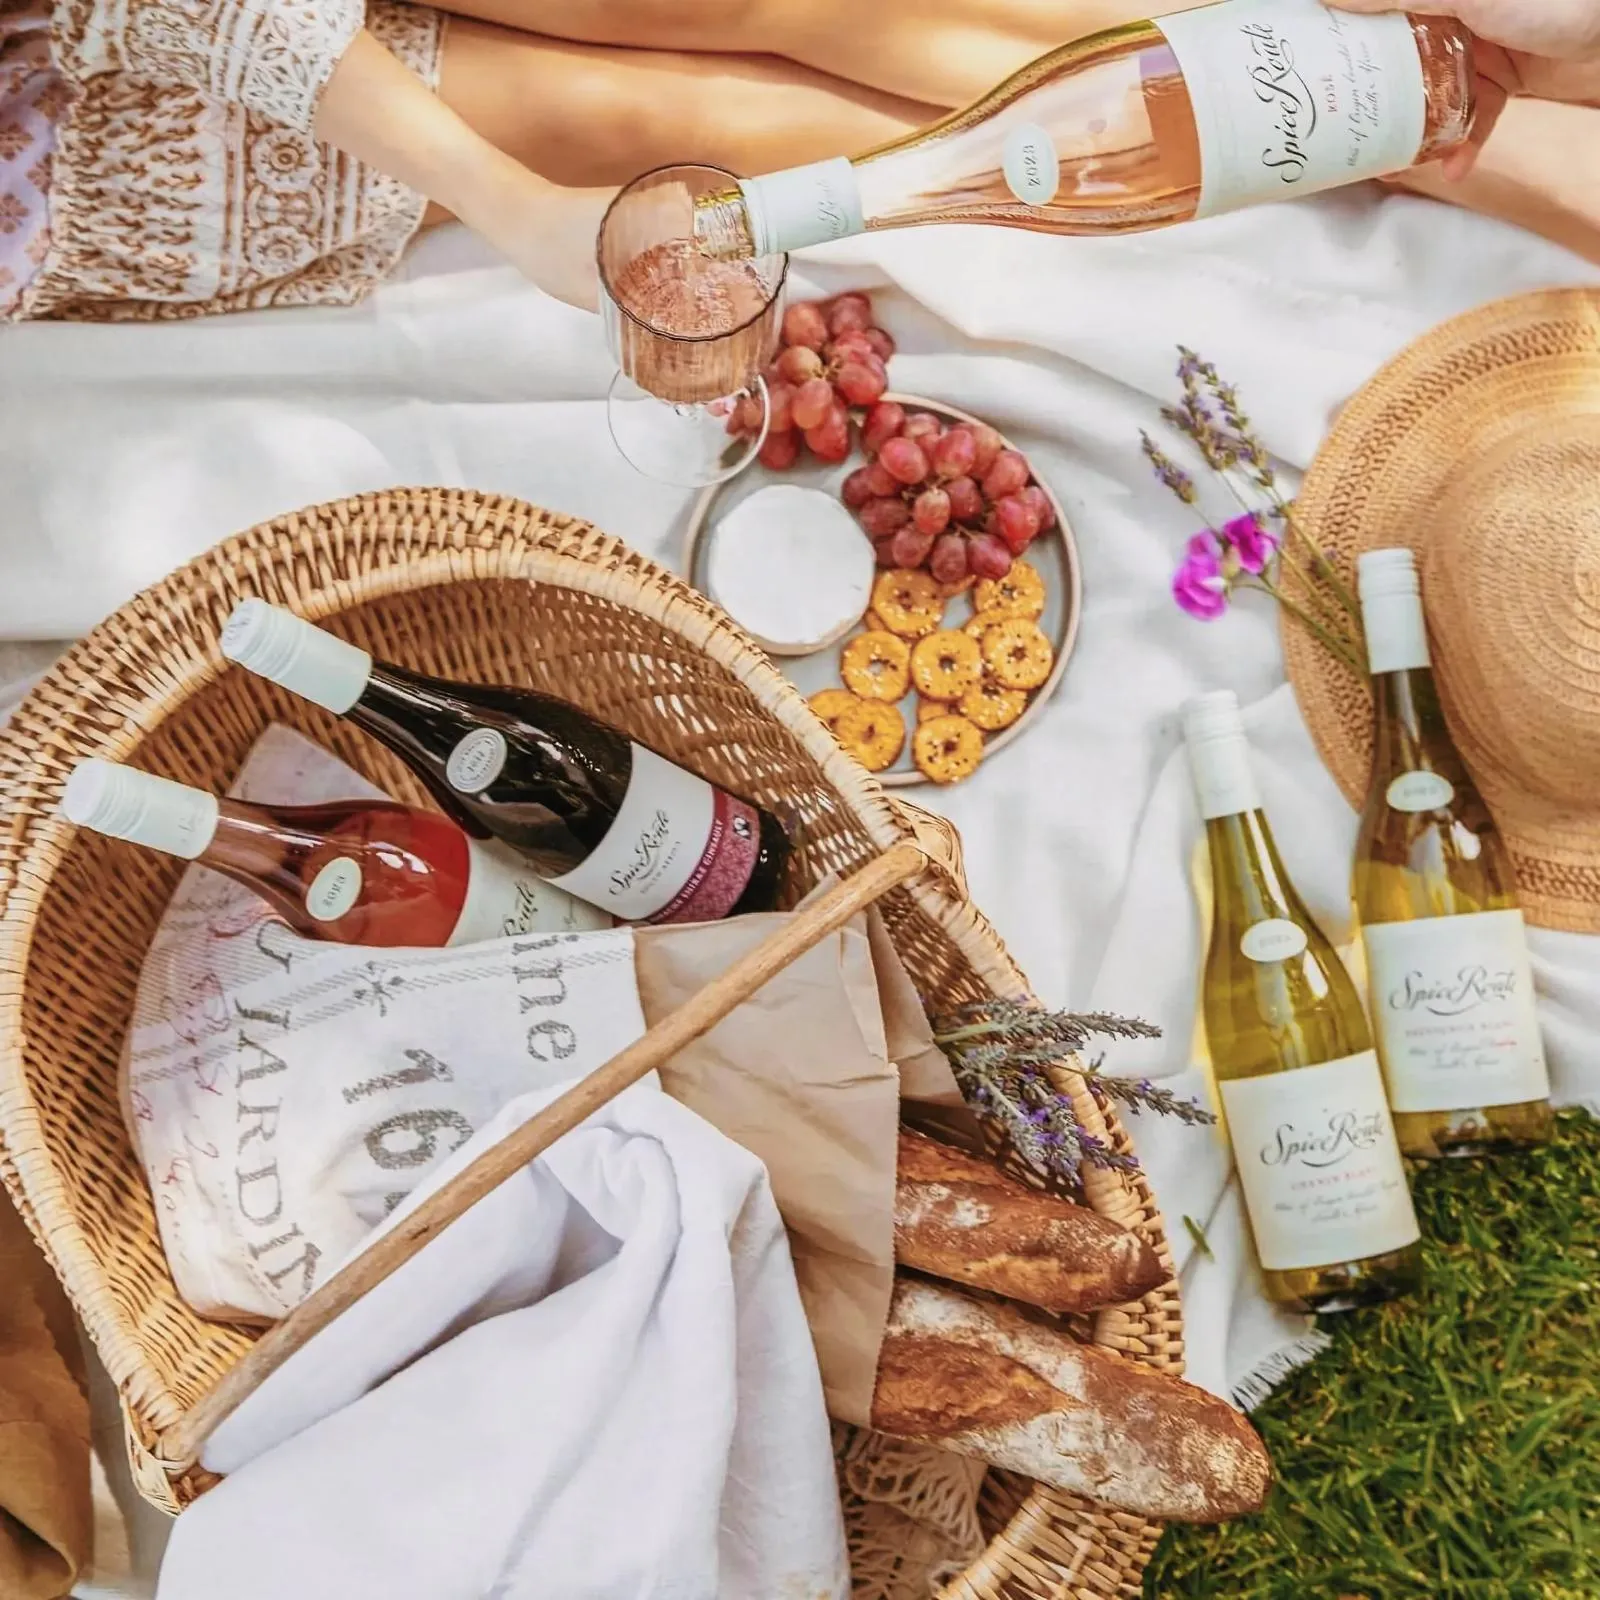 Scenic picnic setup at Spice Route Destination with wine and food.